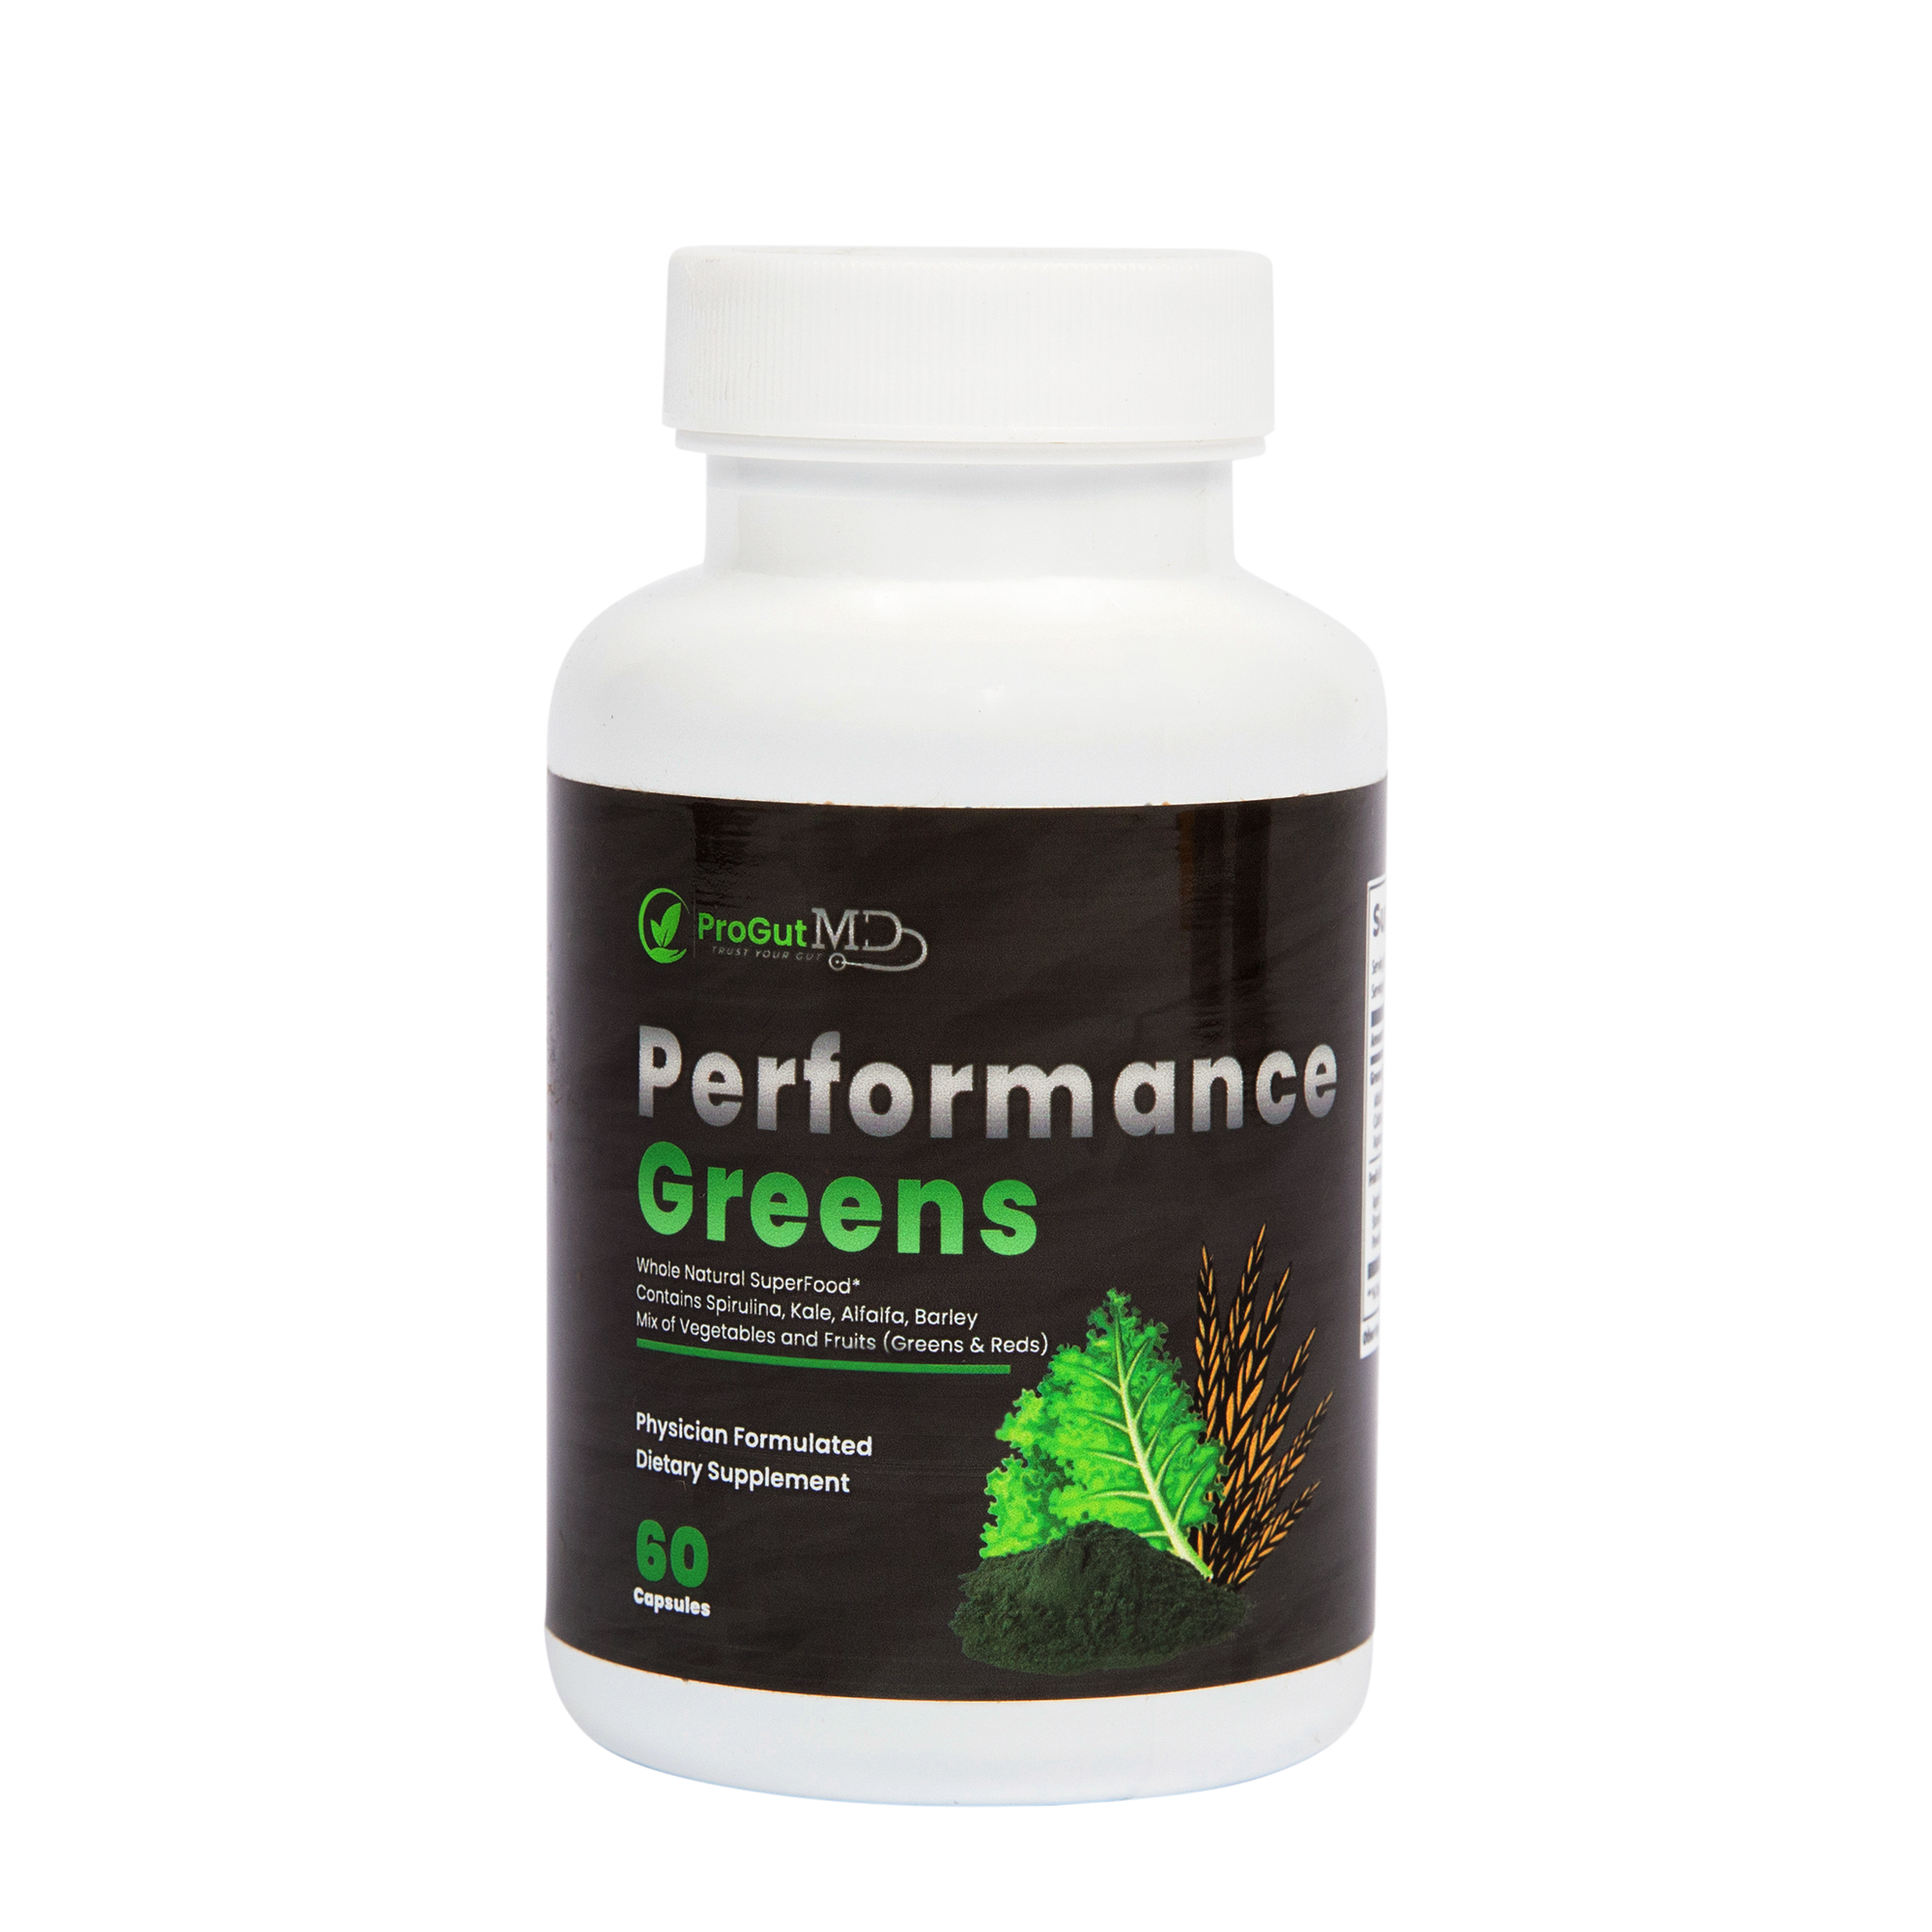 A bottle of Performance Greens